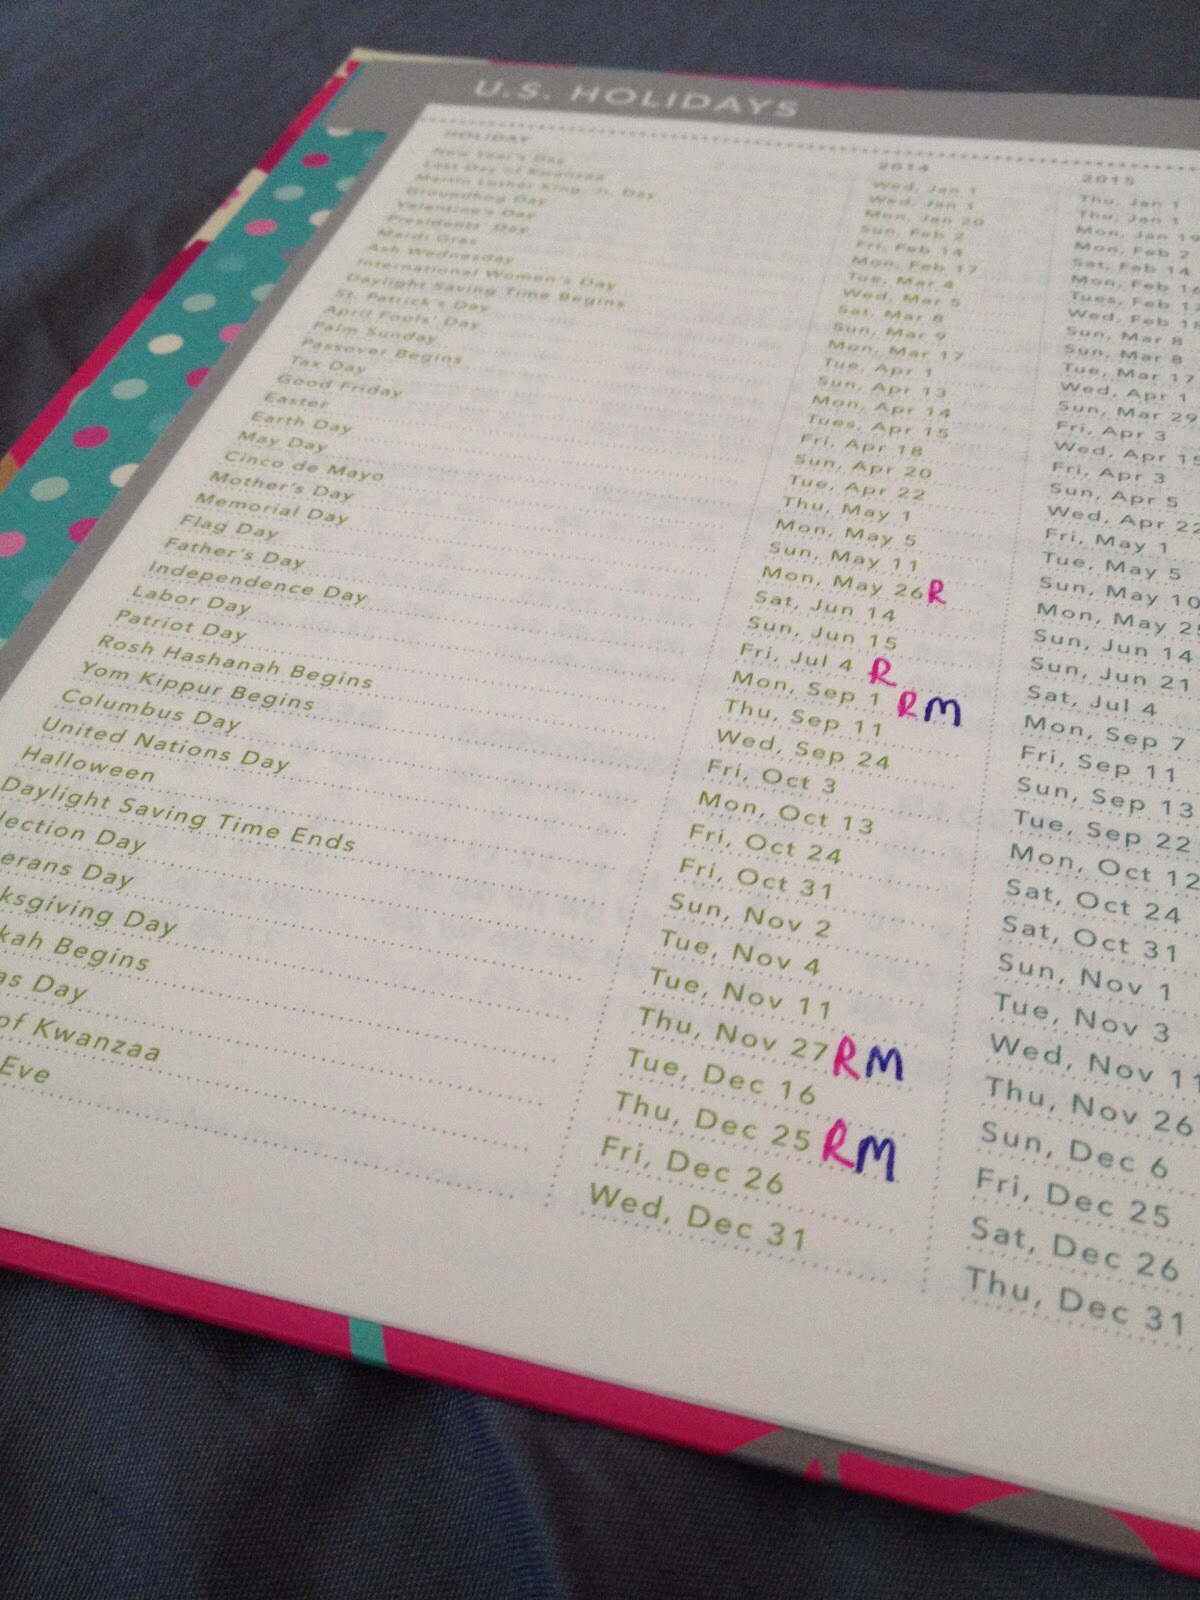 List of Holidays in Remie's Planner Peek Tour